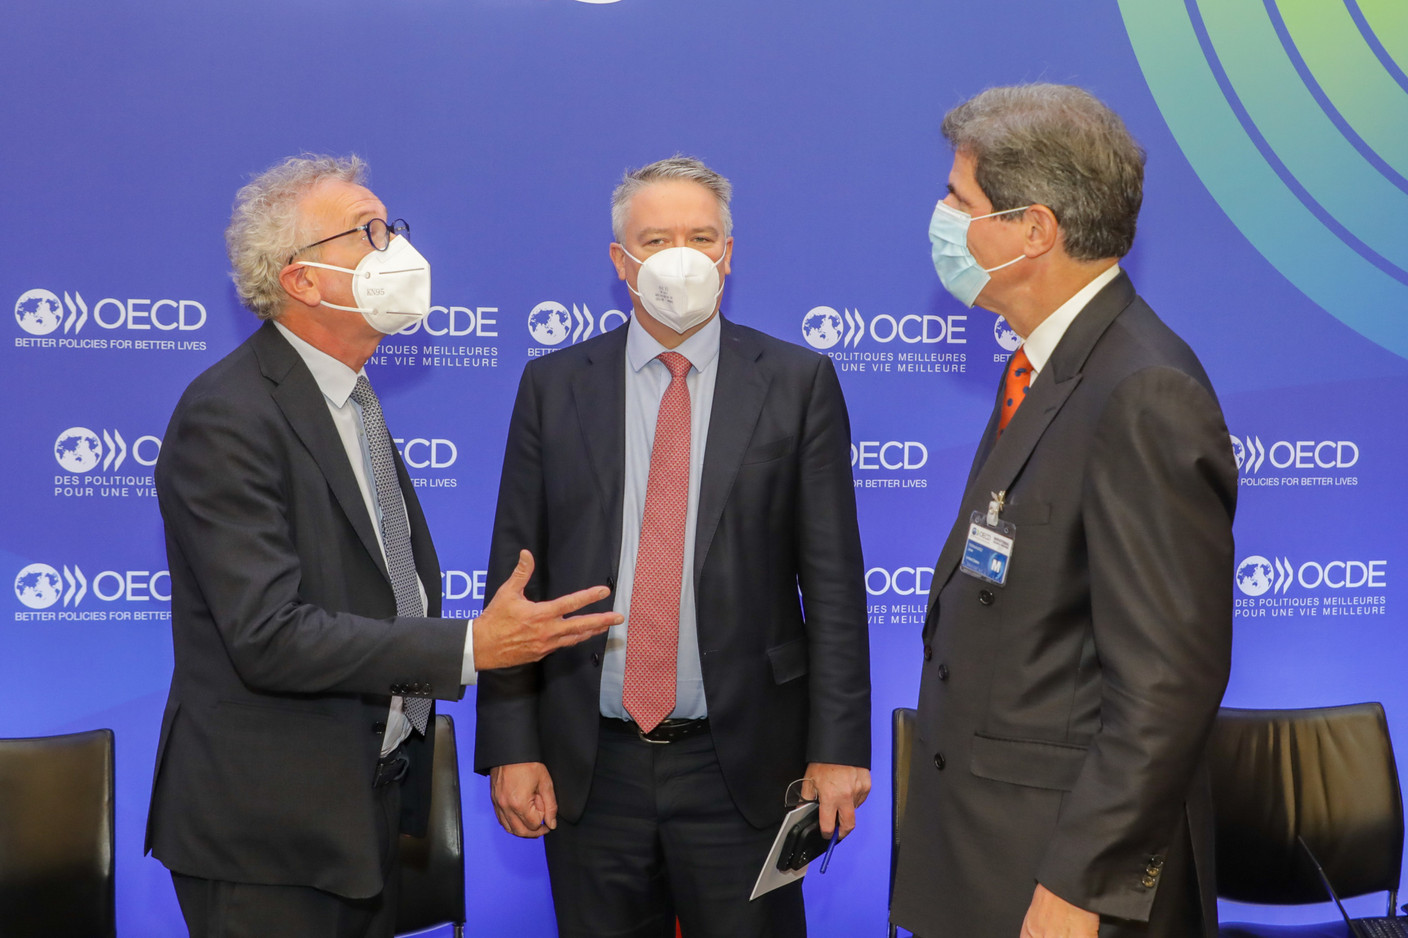 (from left to right) Pierre Gramegna, Minister of Finance; Mathias Cormann, Secretary General of the Organisation for Economic Co-operation and Development (OECD); Jose W. Fernandez, Deputy Secretary of the United States of America for the Economy, Energy and the Environment  SIP/LUC DEFLORENNE